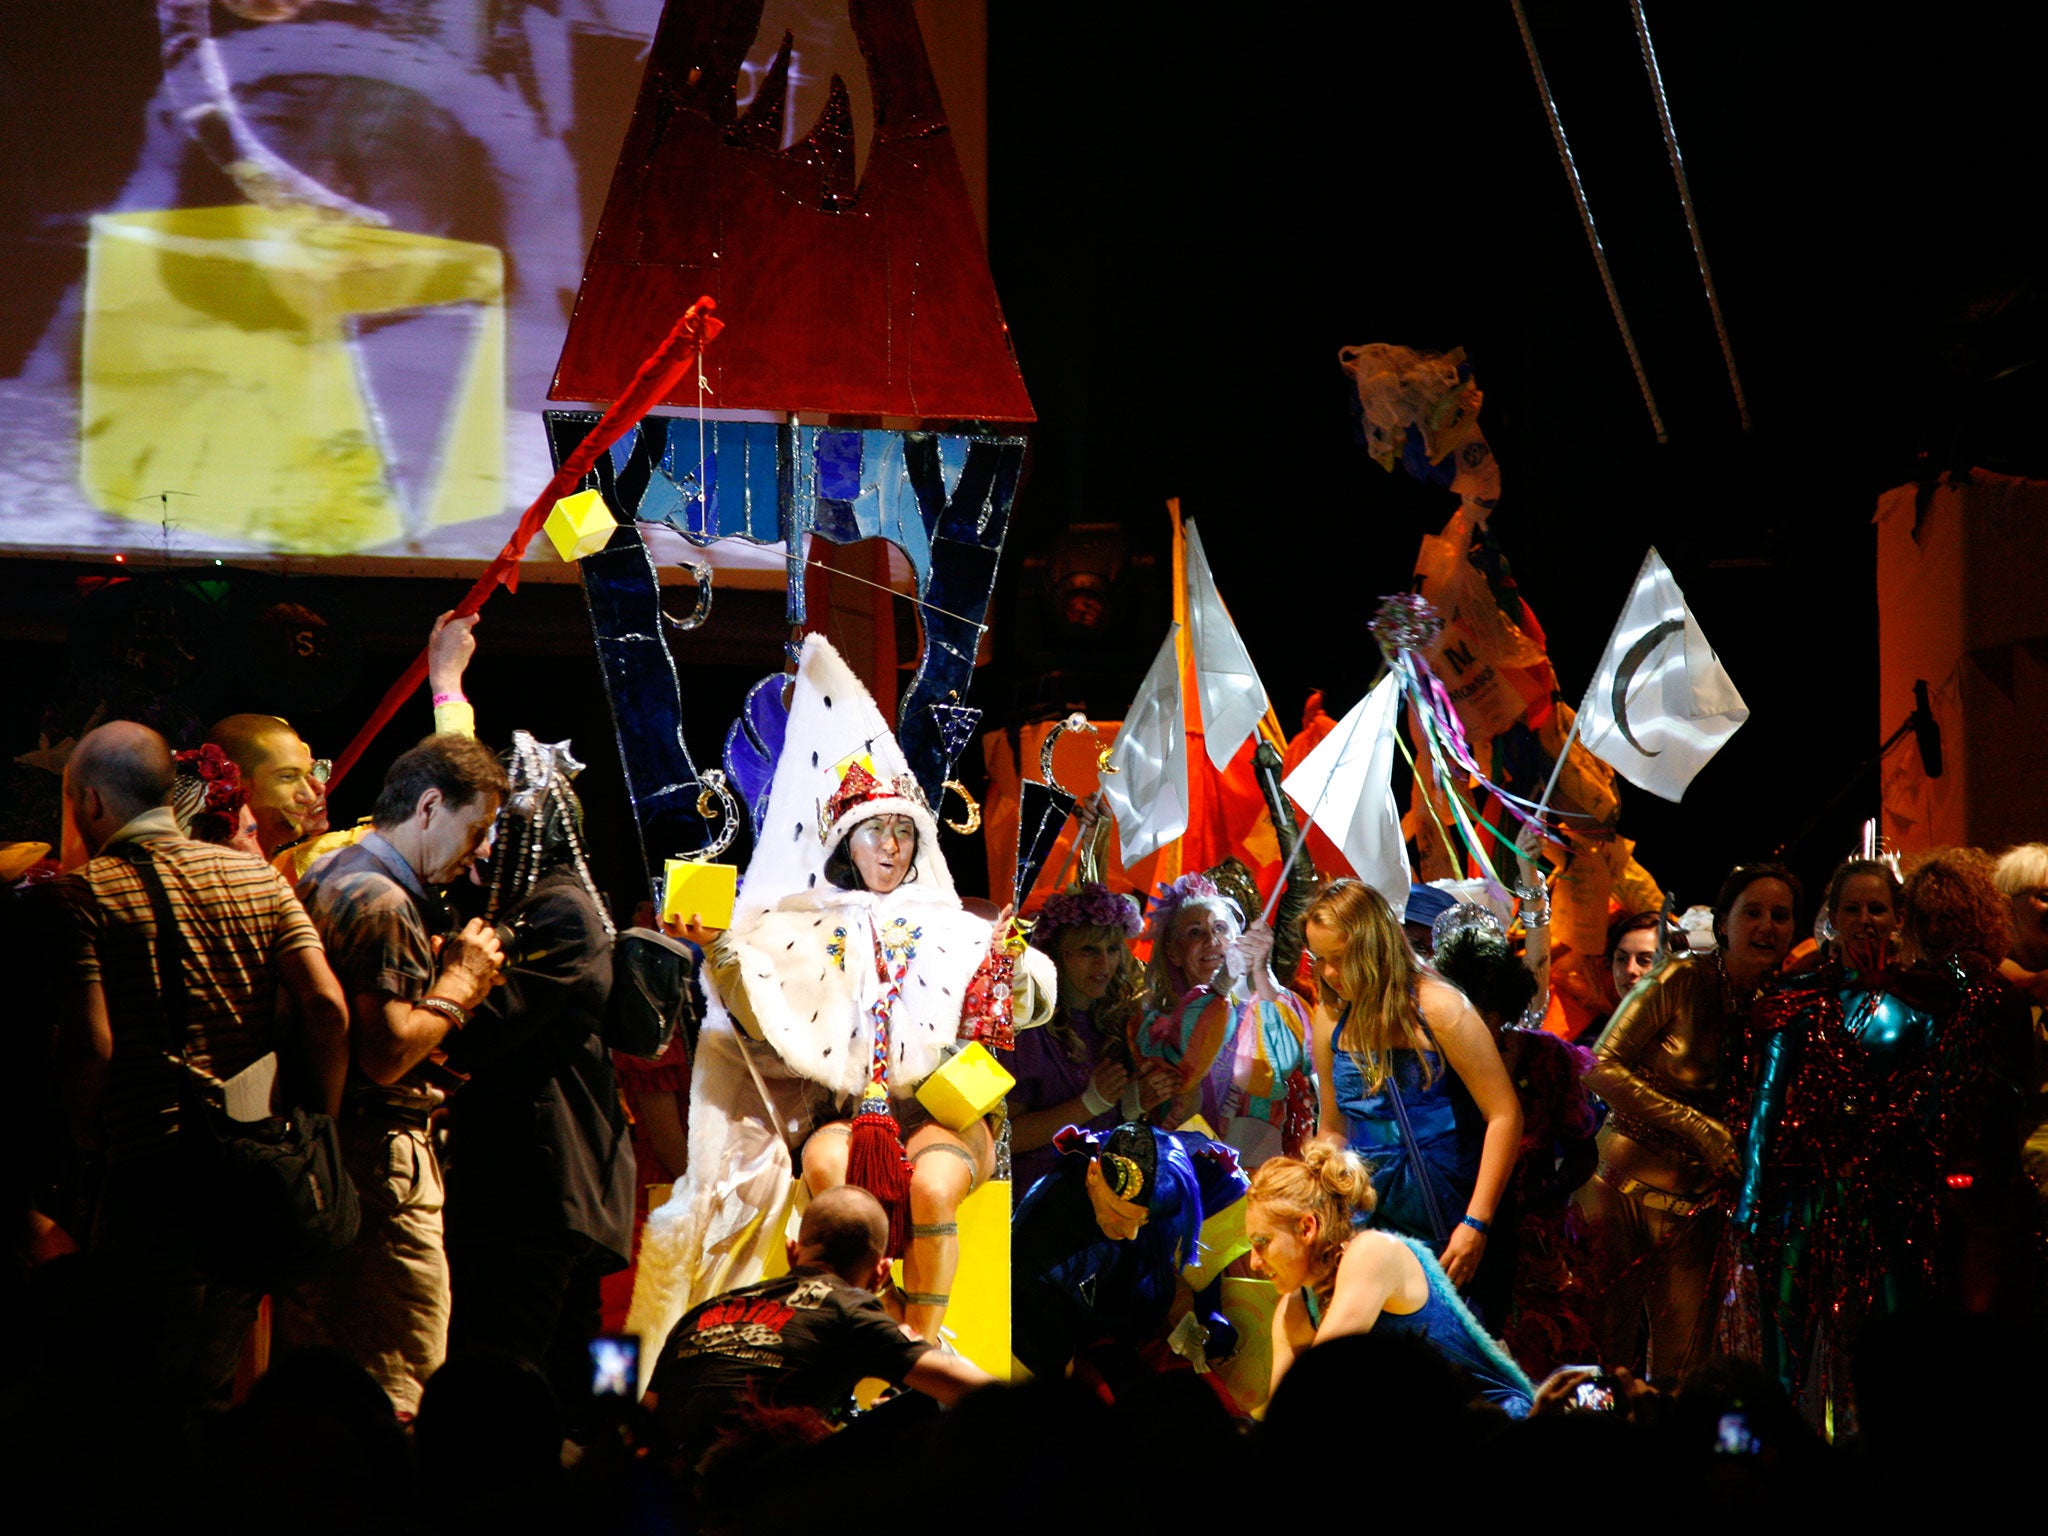 Miss Fancy Chance wins The Alternative Miss World in 2009 at the Roundhouse, London.